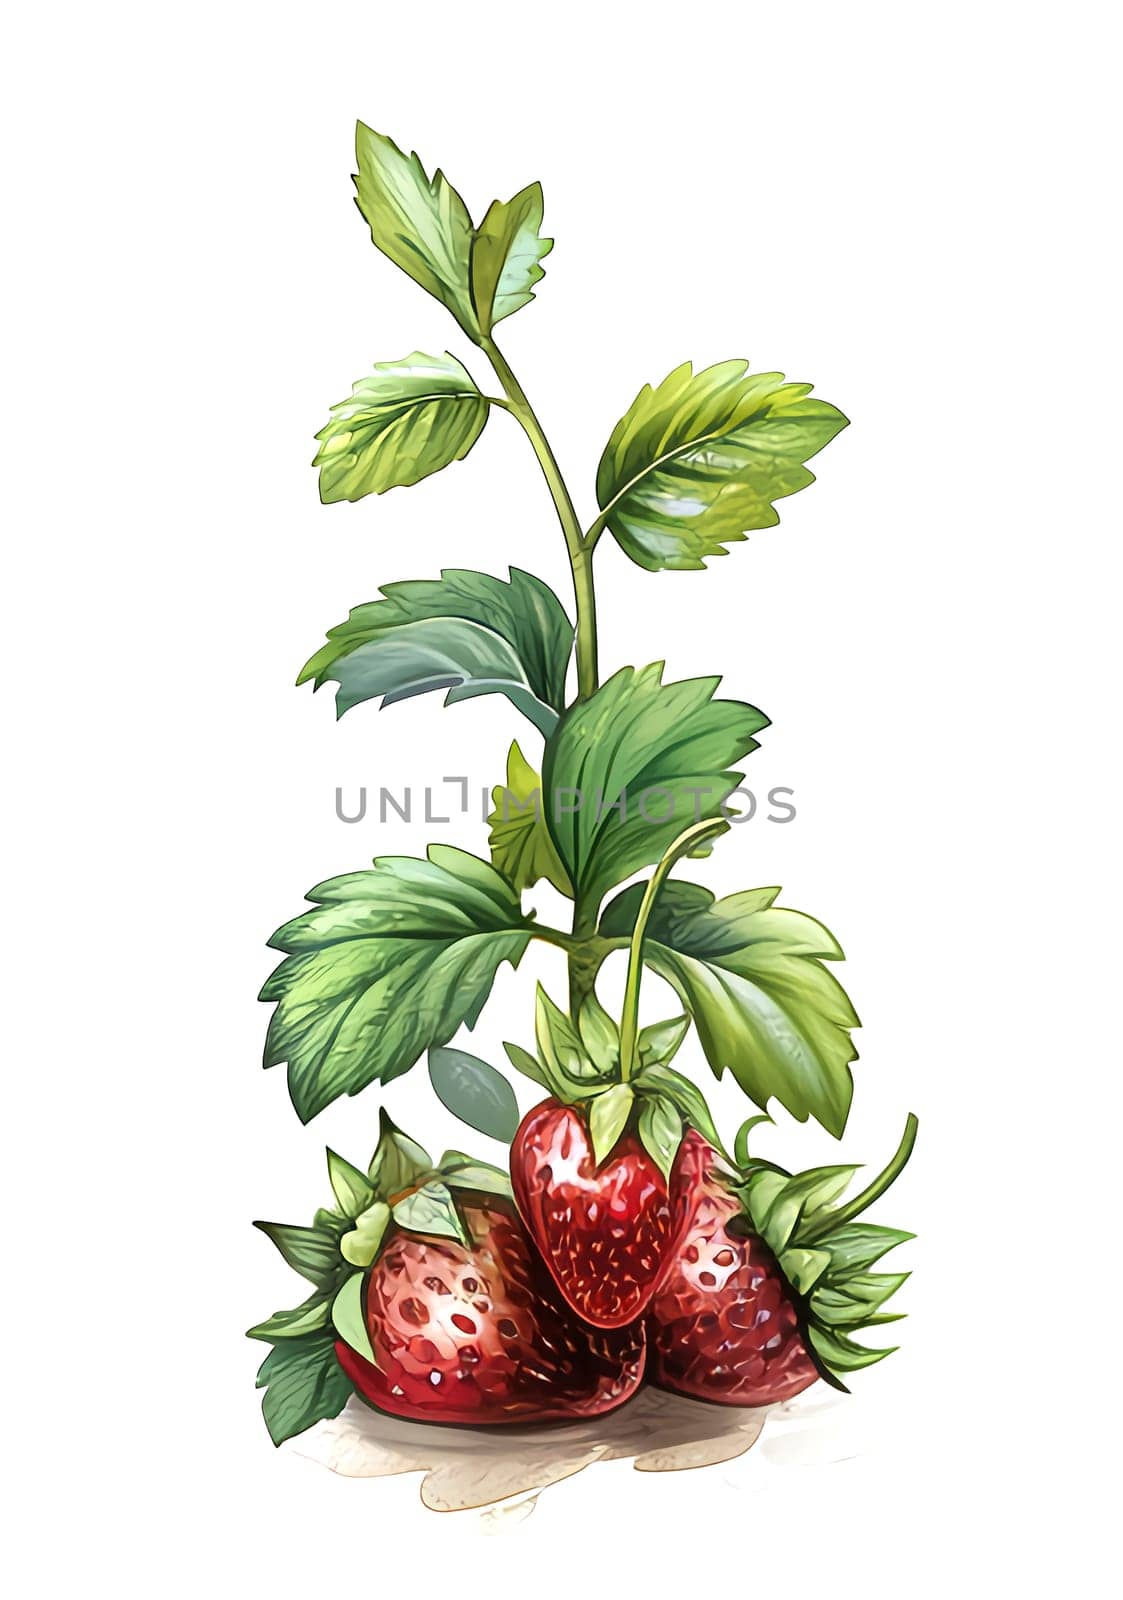 Strawberry clipart. Berries with leaves and flower clipart. Cute strawberry clipart. Summer gardening.